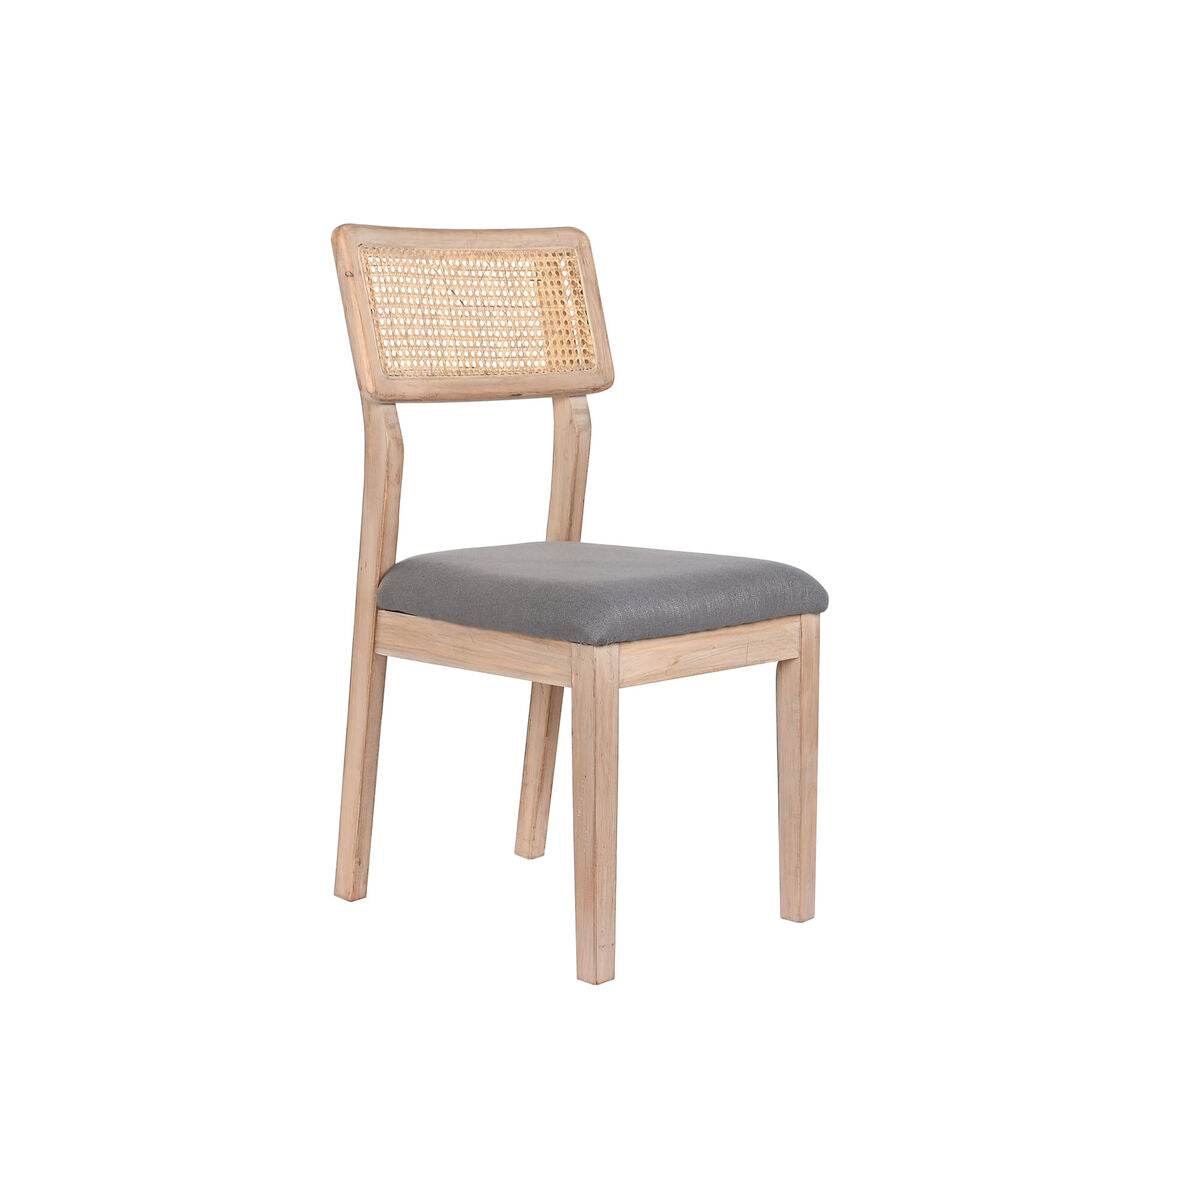 Dark Grey Dining Chair in Wood and Rattan (46 x 53 x 90 cm)